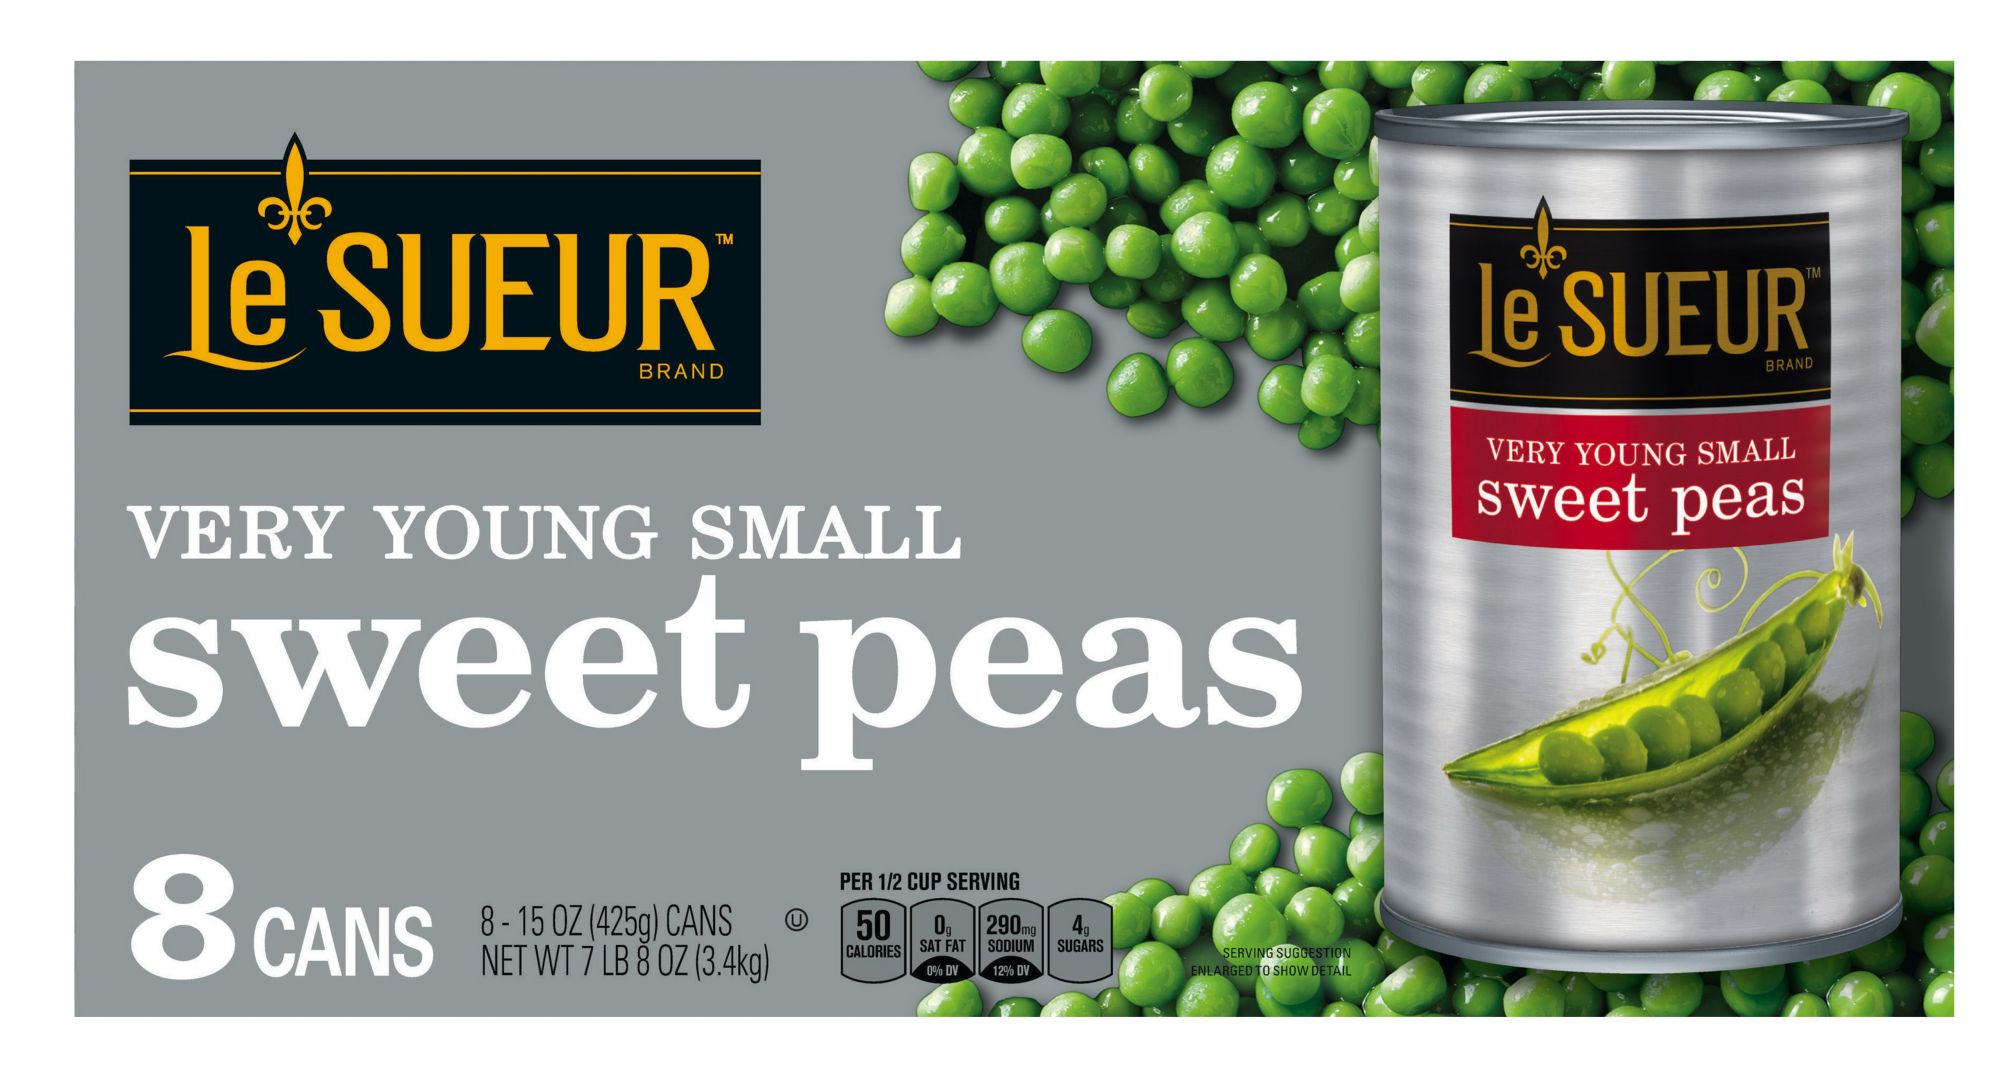 Le Sueur Very Young Small Sweet Peas, 8 pk./15 oz.